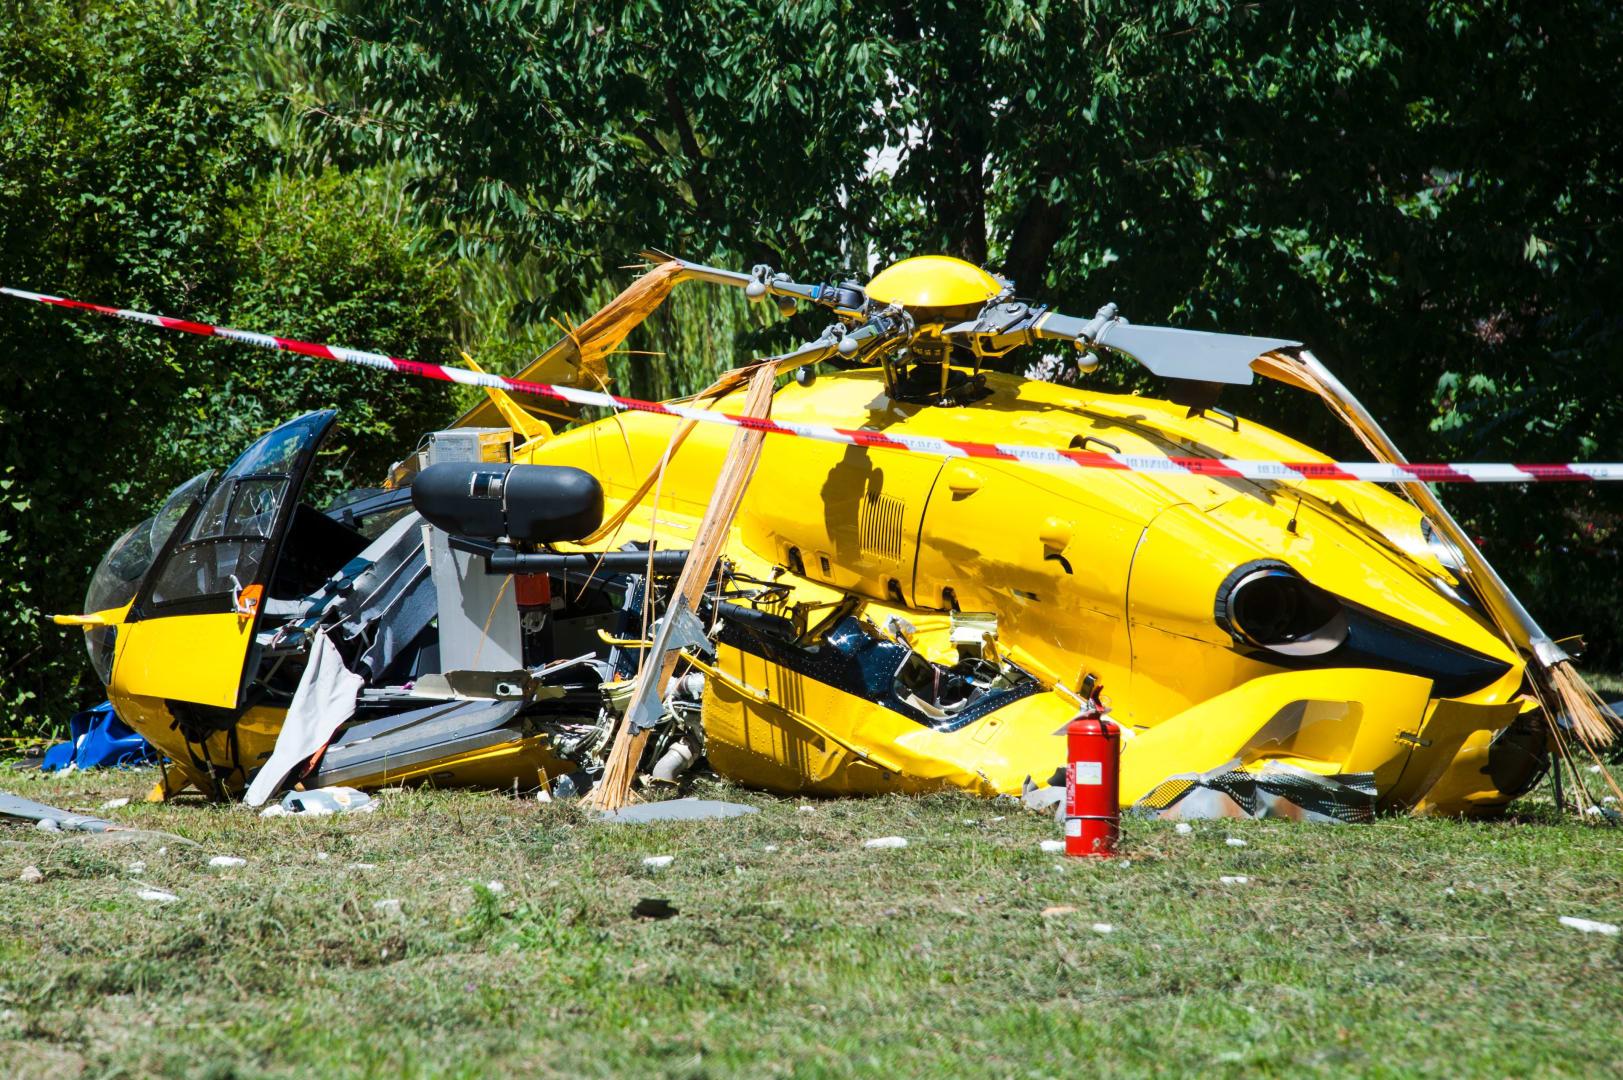 ‘Another vaxxident’: Social media reacts to helicopter crash report